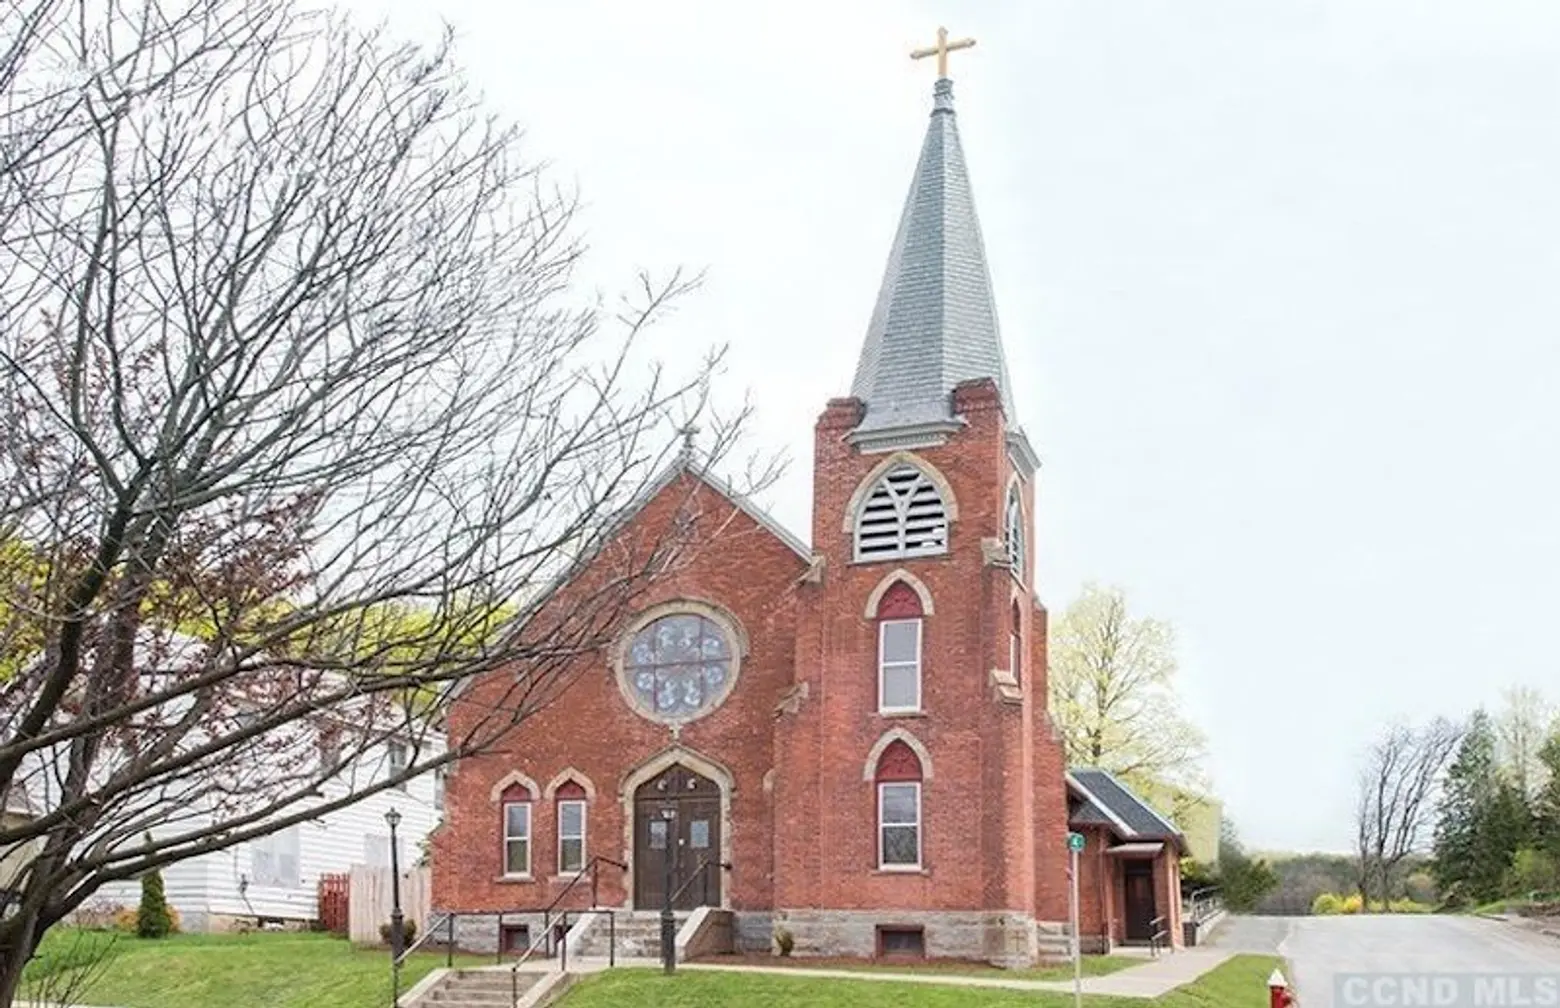 For just $515K, an 1890s upstate church renovated into a unique single-family home